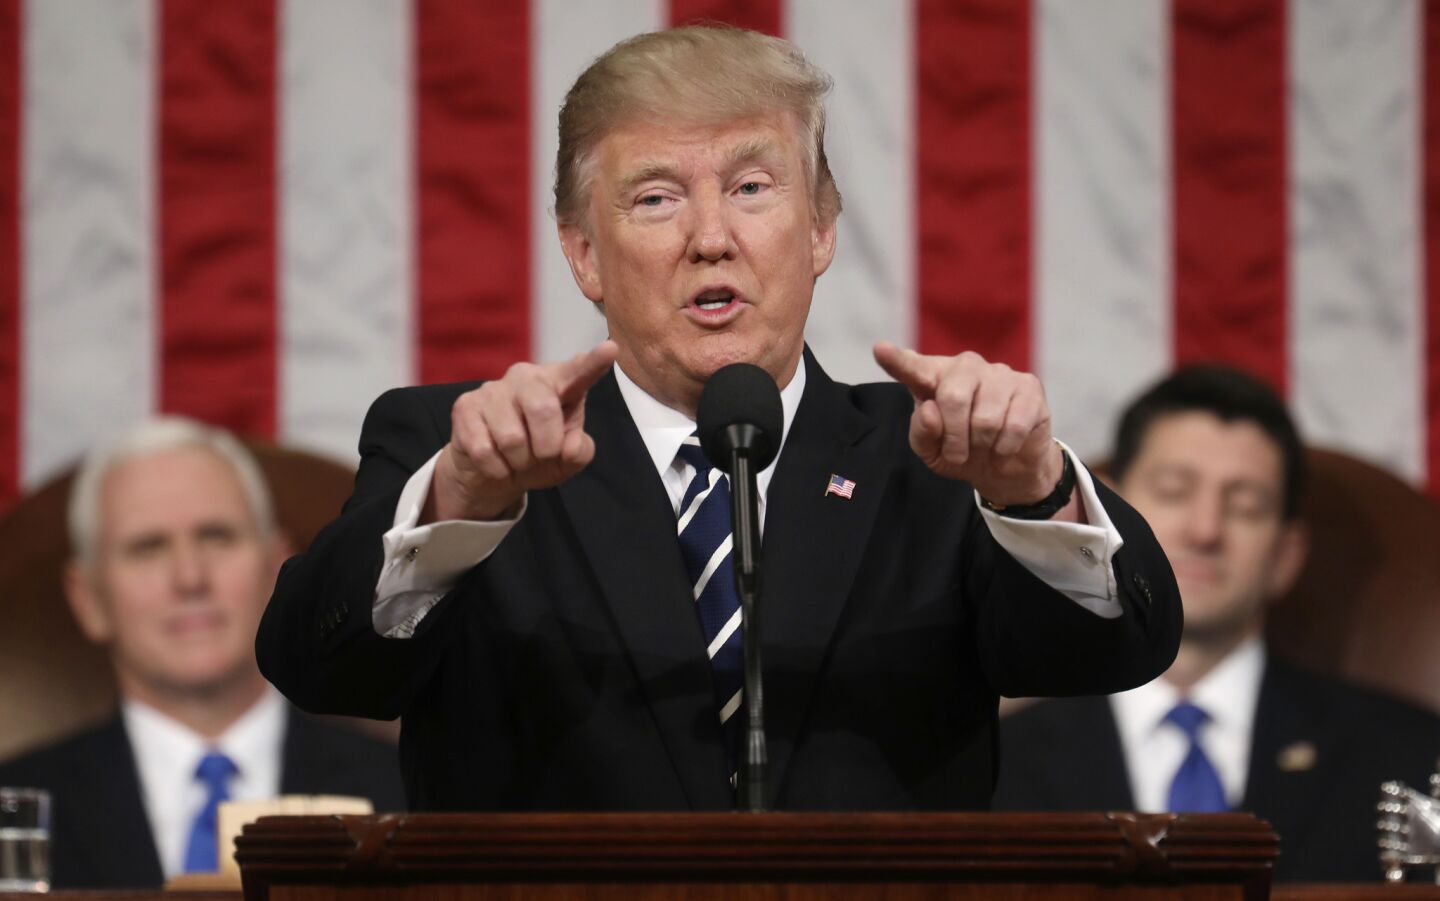 President Trump addresses a joint session of Congress on Tuesday night.